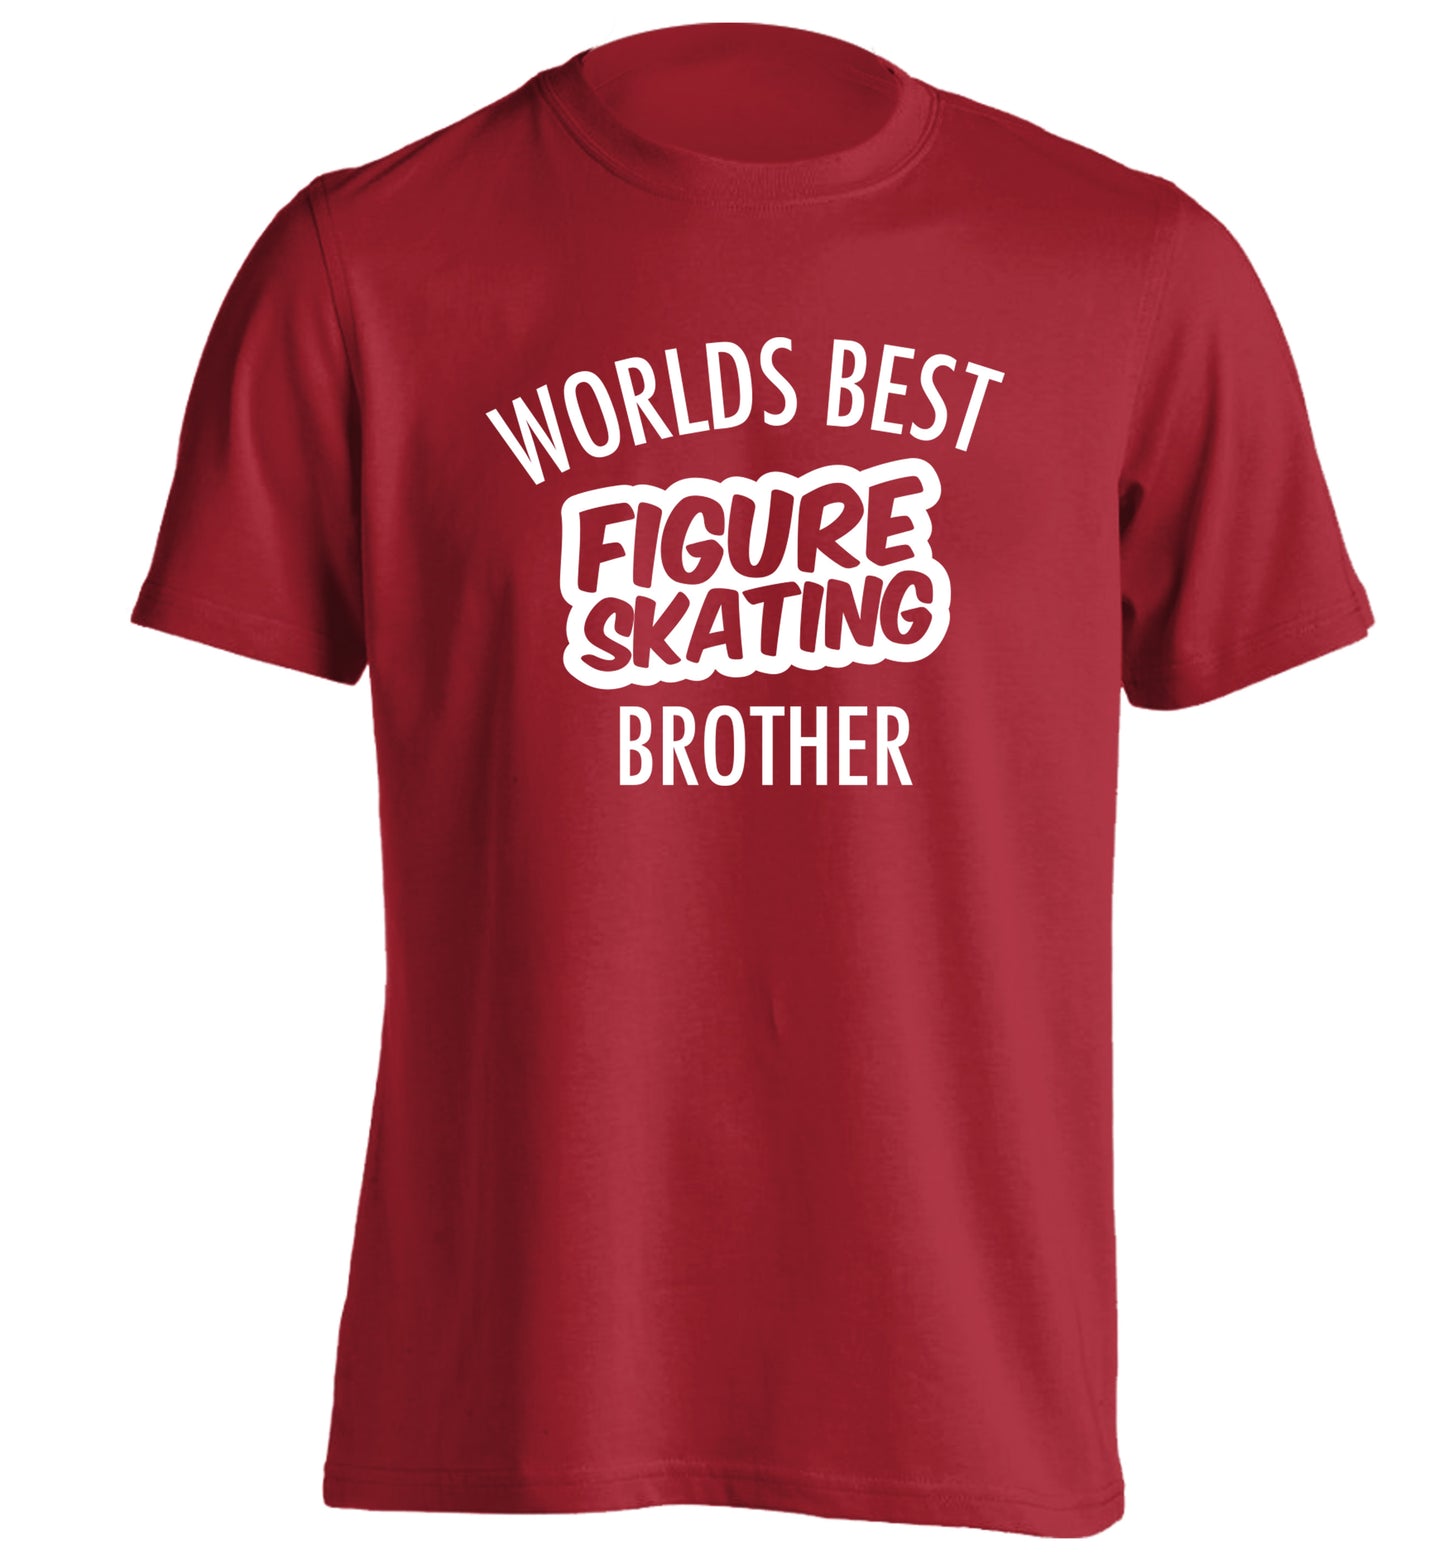 Worlds best figure skating brother adults unisexred Tshirt 2XL